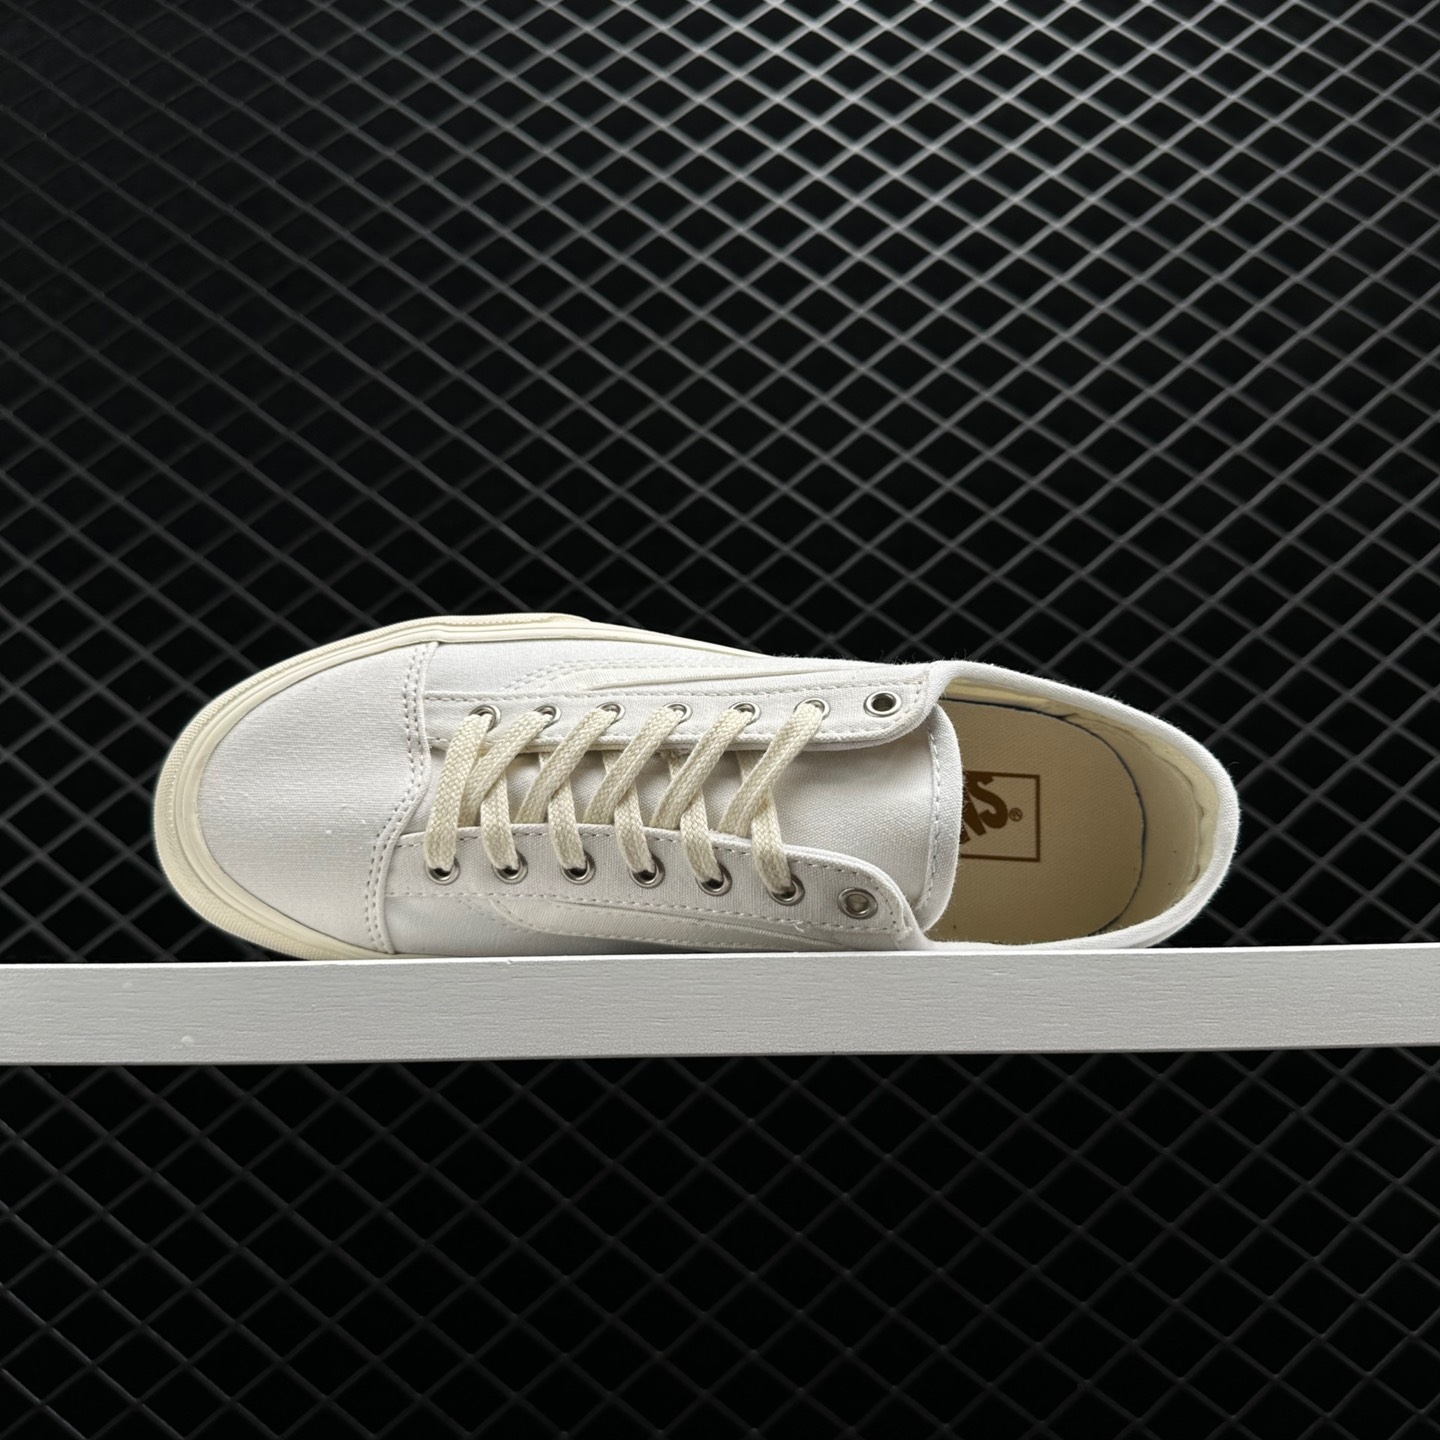 Vans Style 36 Decon SF 'Marshmallow' VN0A3MVLQC5 - Classic Sneaker Design for Every Day